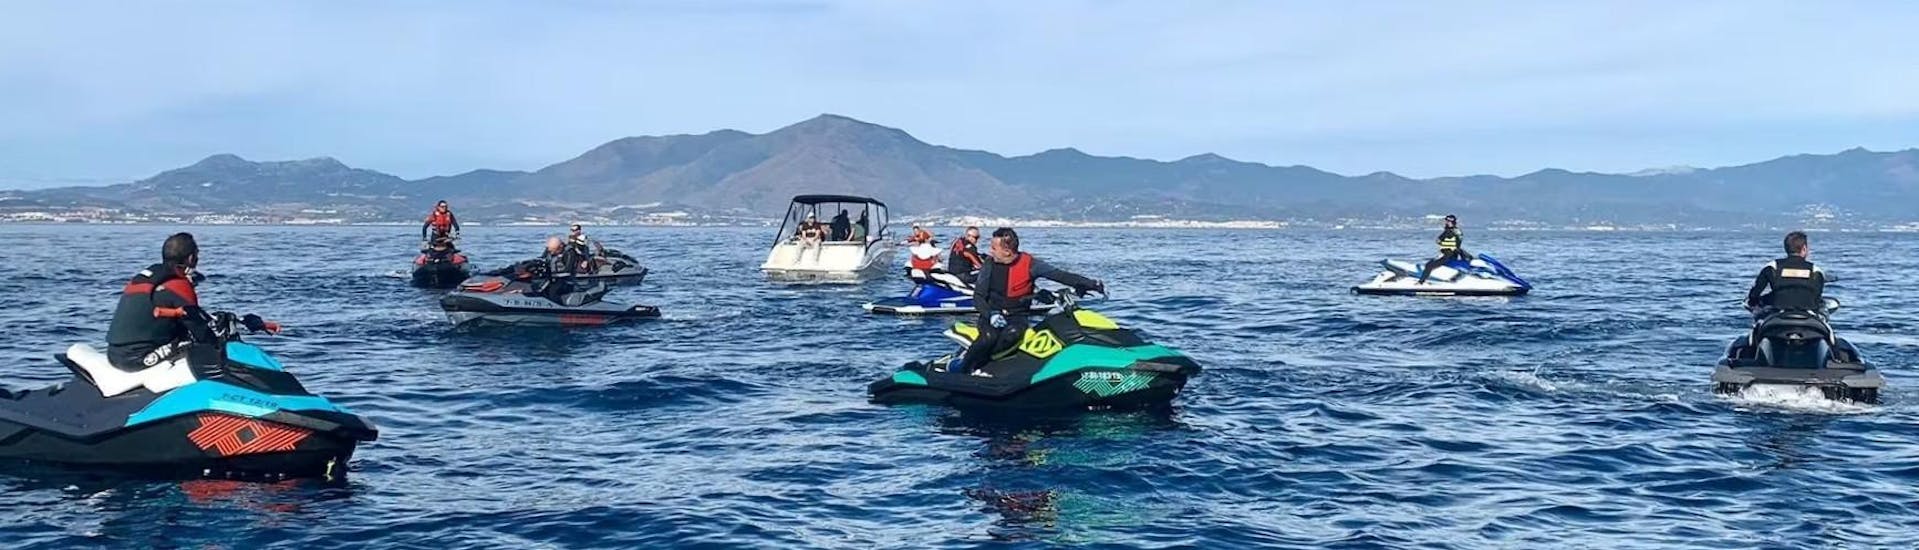 Participants out on a sunny day in Costa del Sol jet skiing during a jet ski safari to Puerto Sotogrande with Marbella Jet Center.